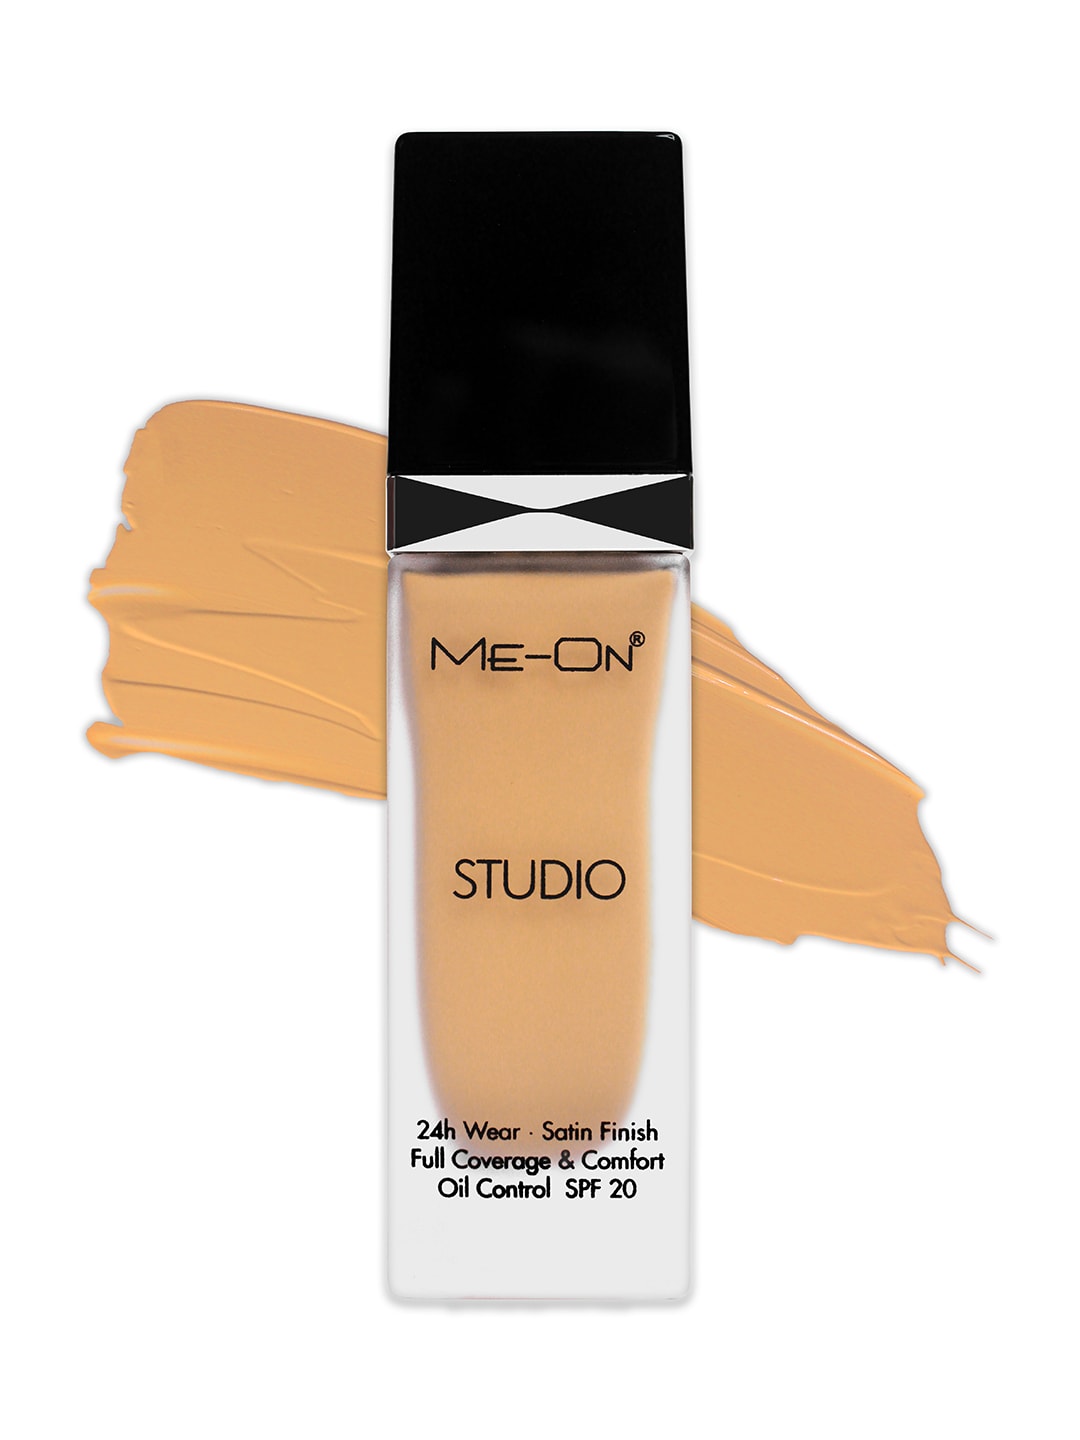 ME-ON Studio Foundation - Shade 21 Price in India